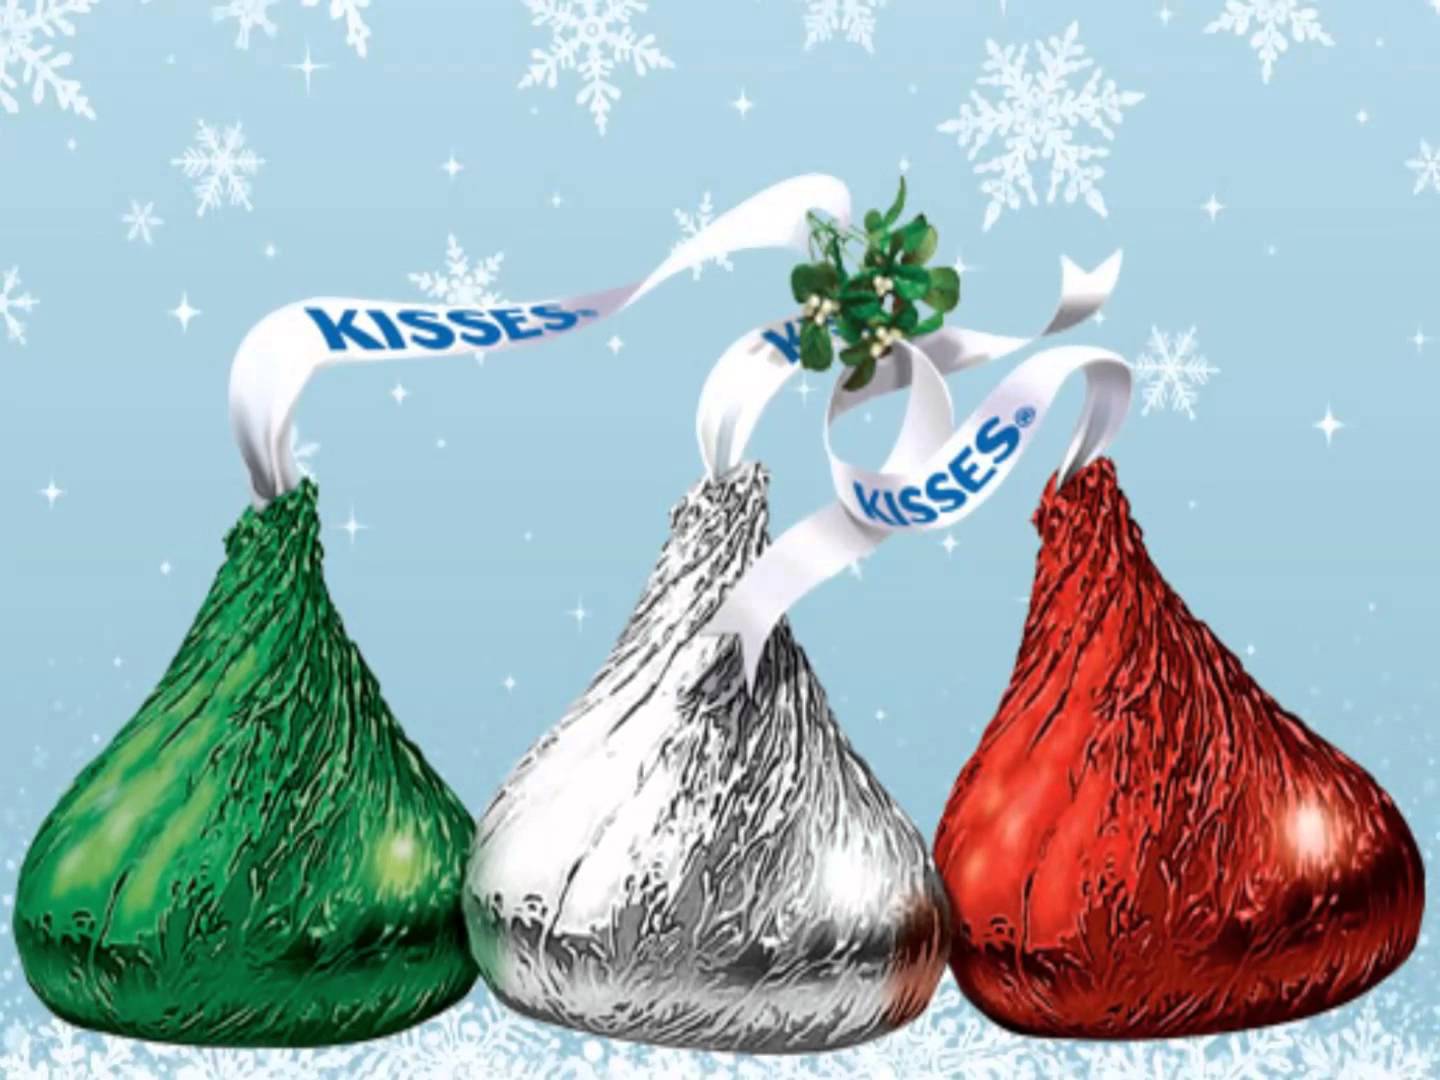 You Can Eat Chocolate Only If You Get More Than 10 on This Quiz Hershey Kisses